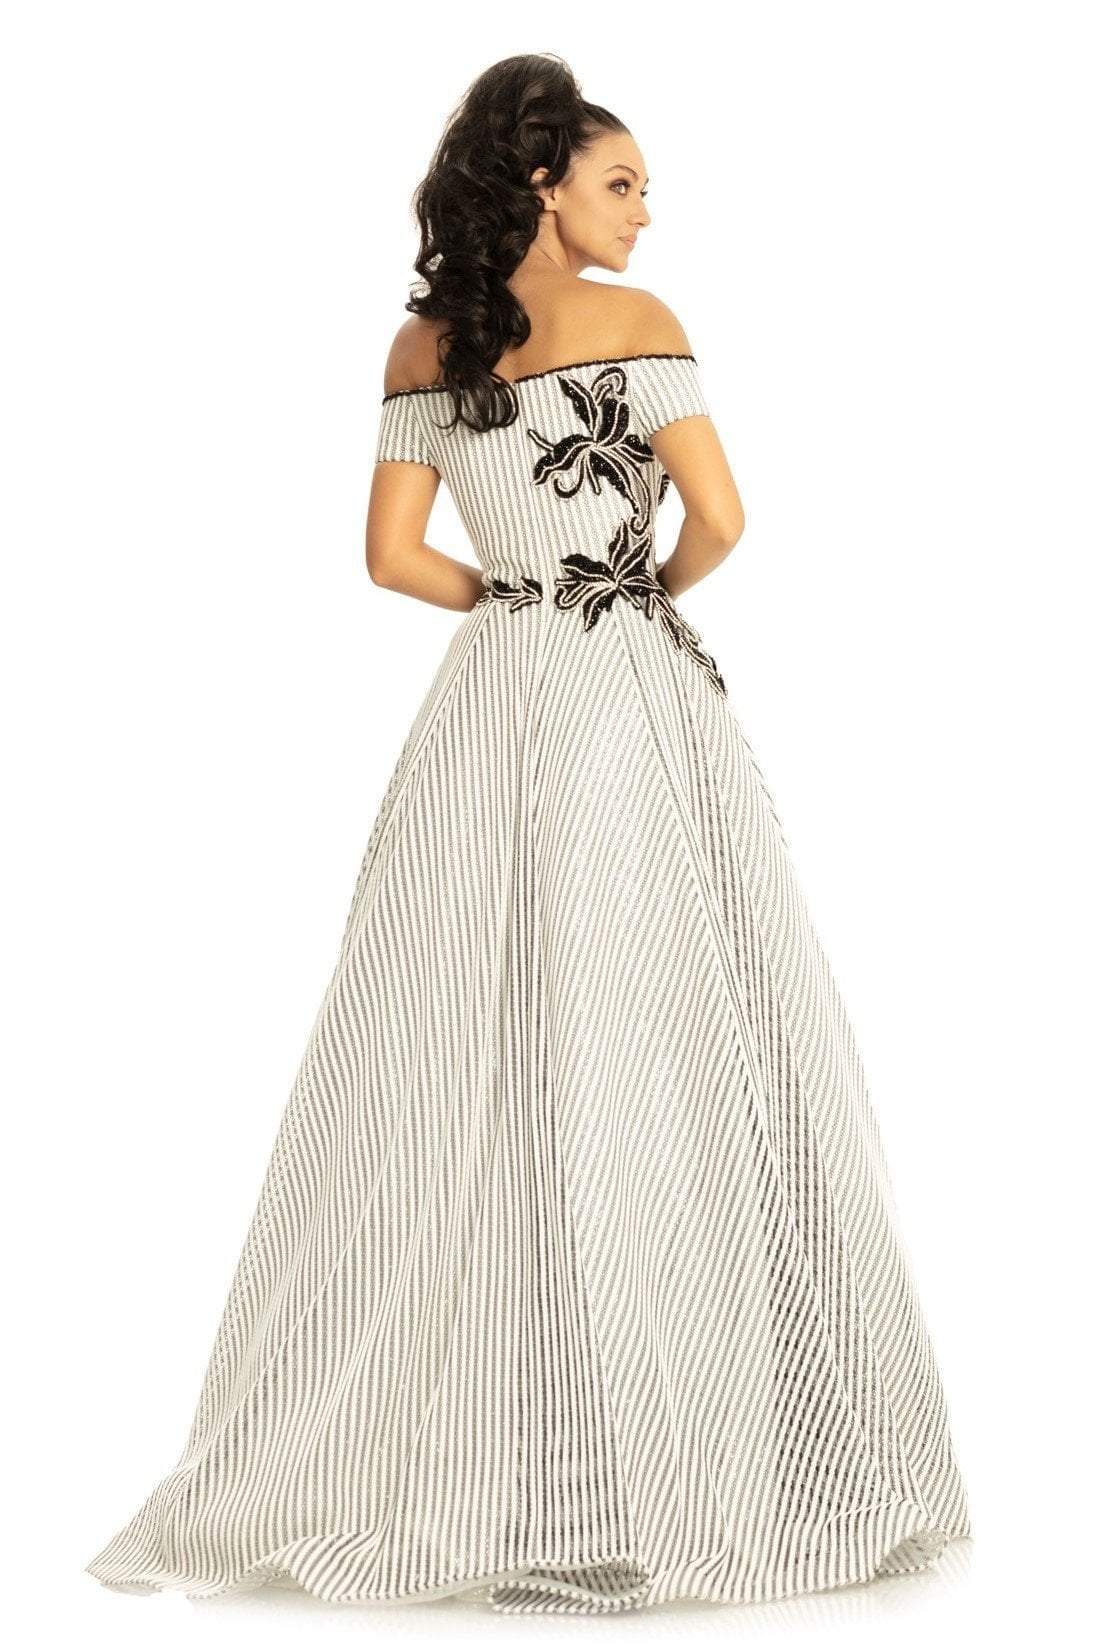 Johnathan Kayne - 9048 Pinstripe Sequined Off-Shoulder Ballgown In Black and White